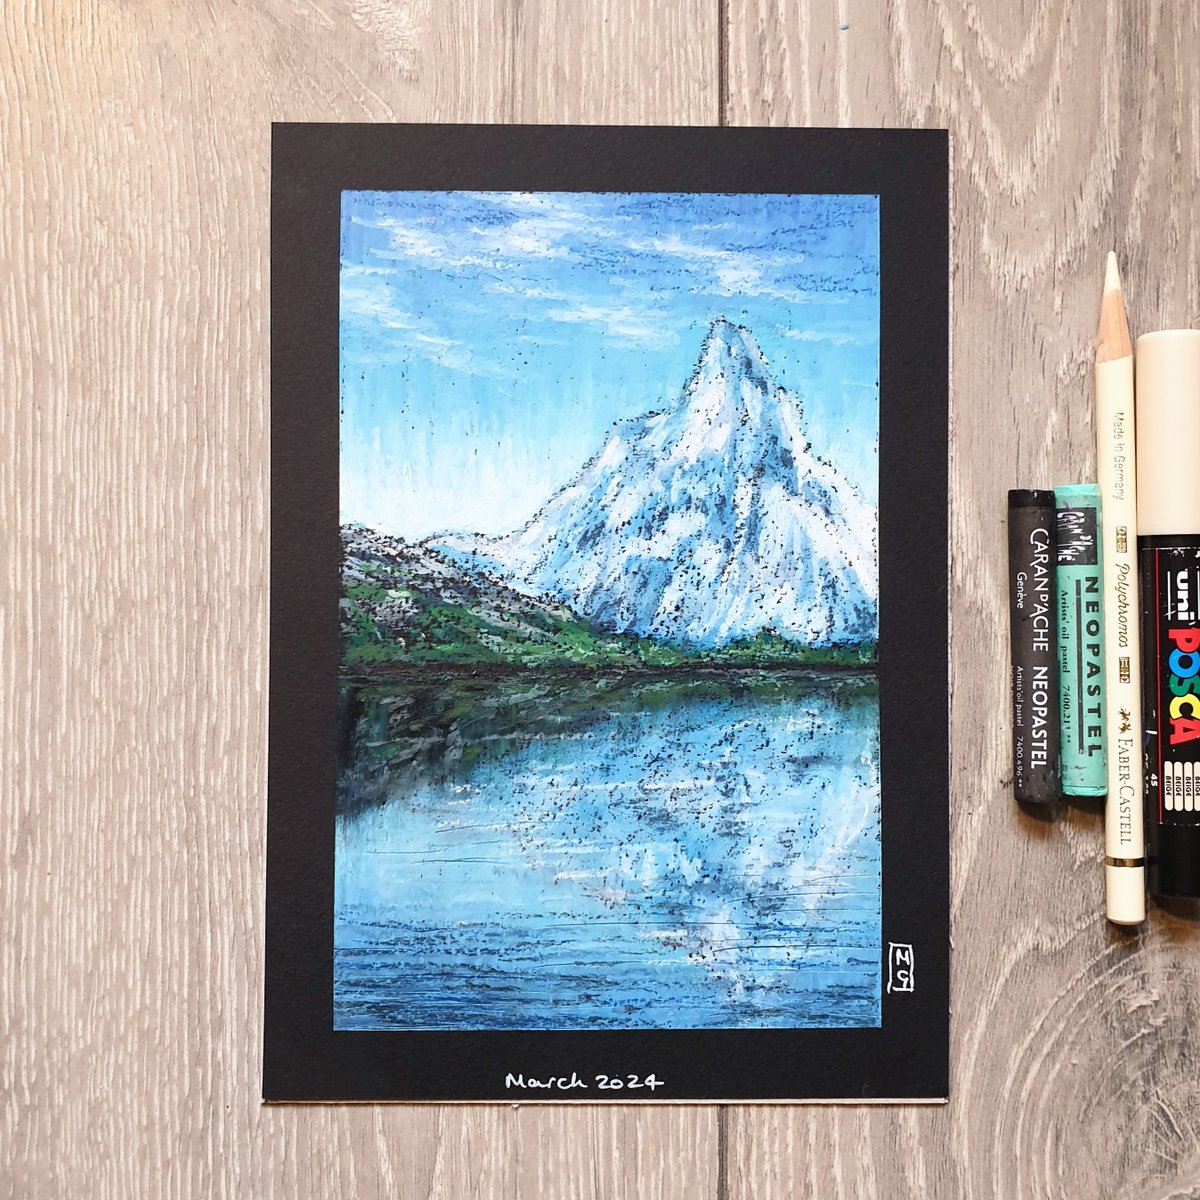 Imagine that fresh mountain air! My oil pastel painting of this mountain and lake scene is available now in my Etsy shop, visit today to find out more... theweeowlart.etsy.com/listing/170045… #OriginalArt #OilPastel #painting #artwork #art #TraditionalArt #Landscape #mountain #lake #Etsy